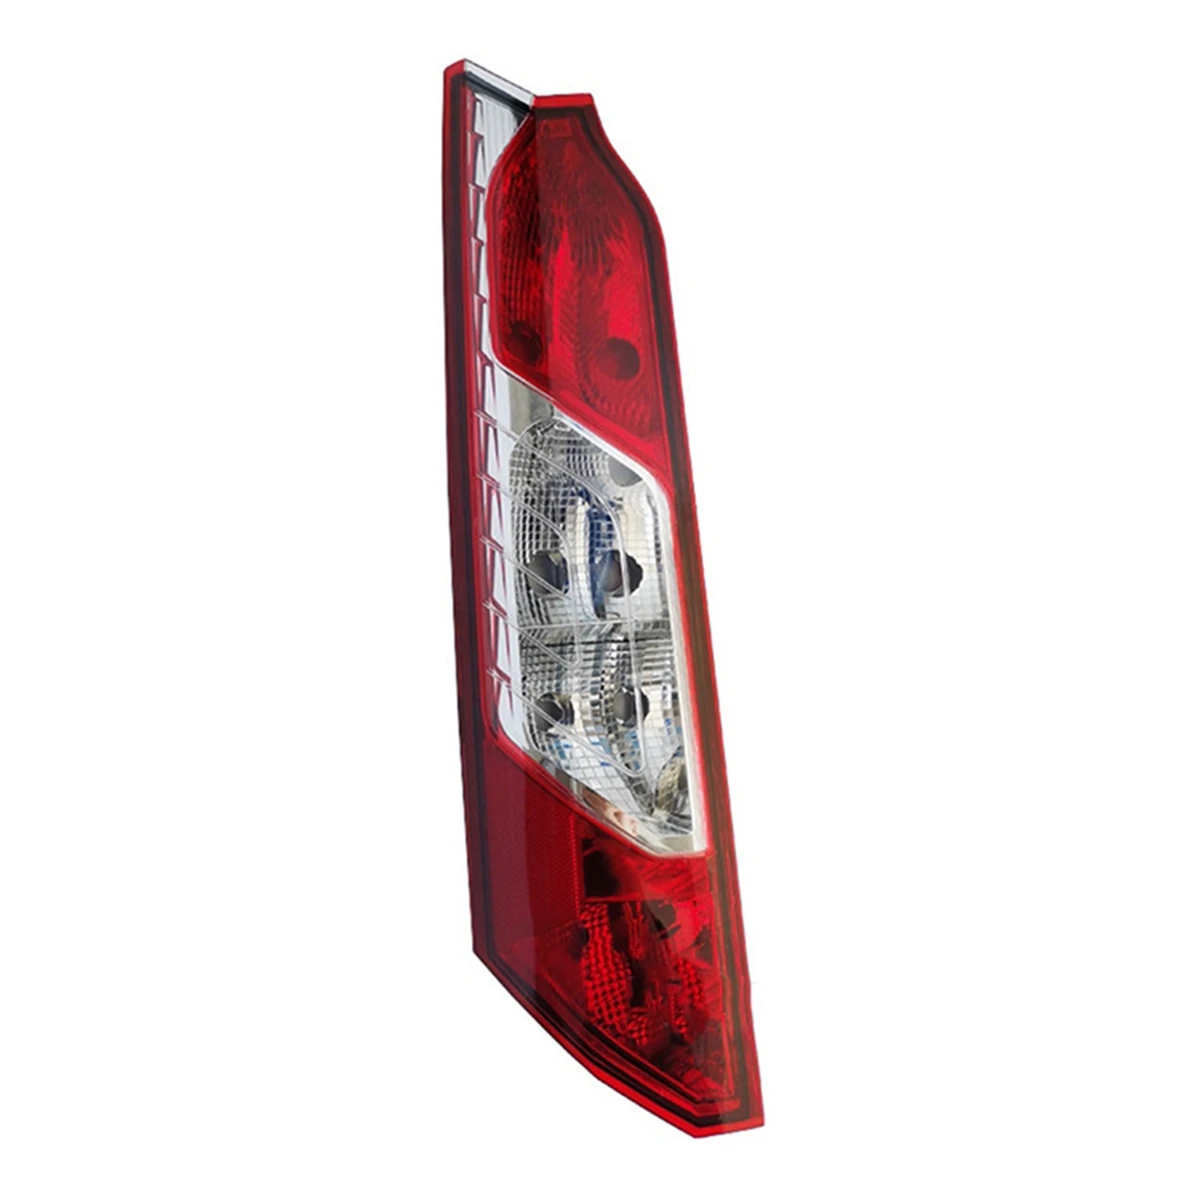 

For Ford Transit Connect MK2 Van 2014-2021 Car Rear Tail Light Without Bulb DT11-13405-AC 1908969 LH Side